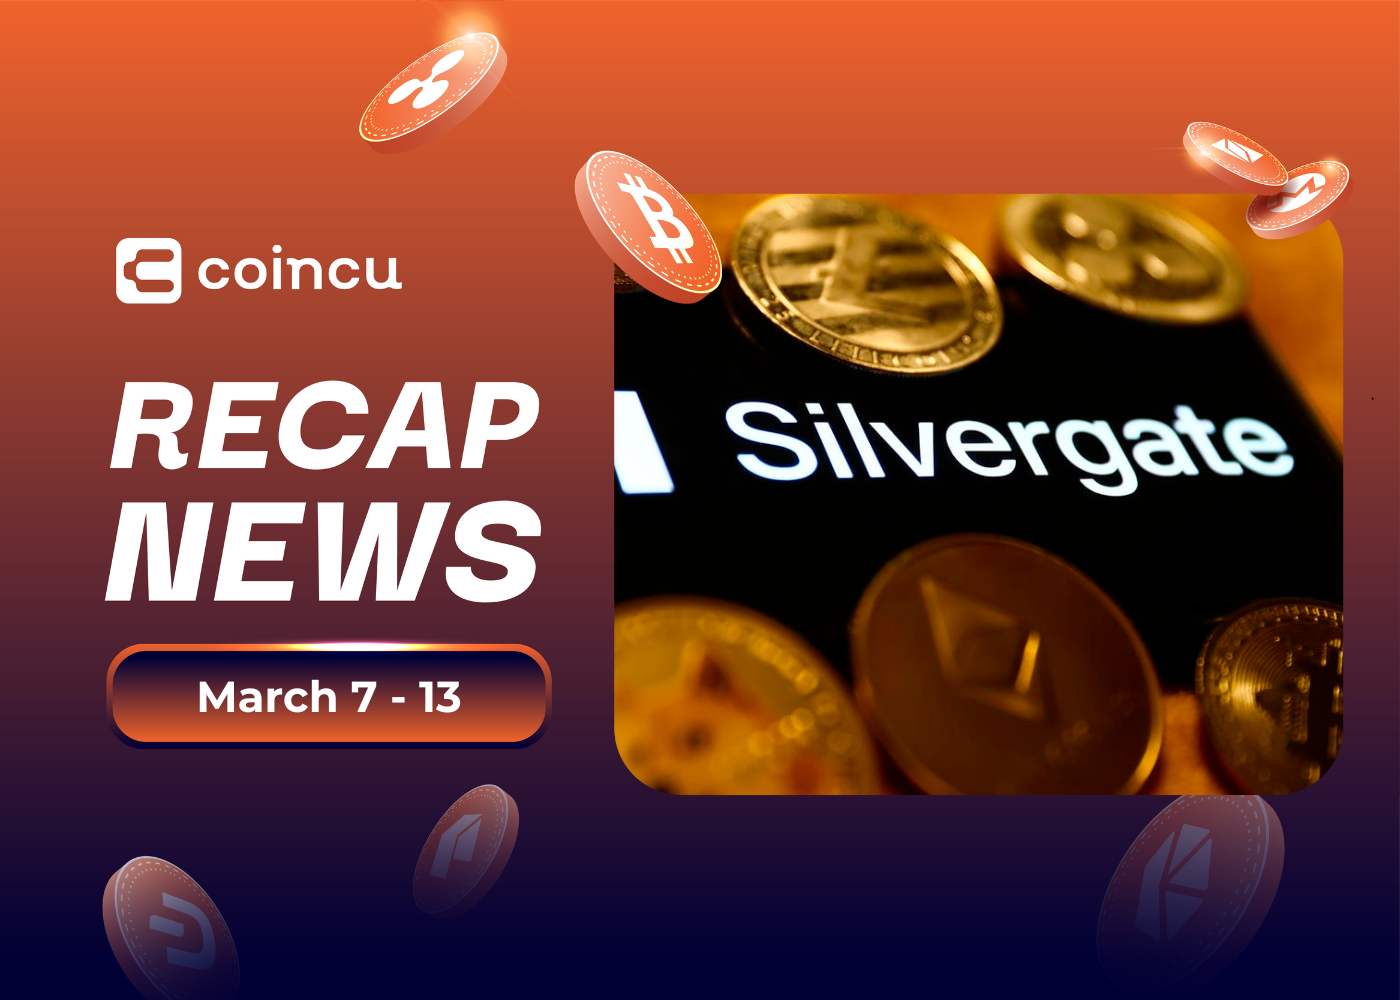 Weekly Top Crypto News (March 7 - March 13)